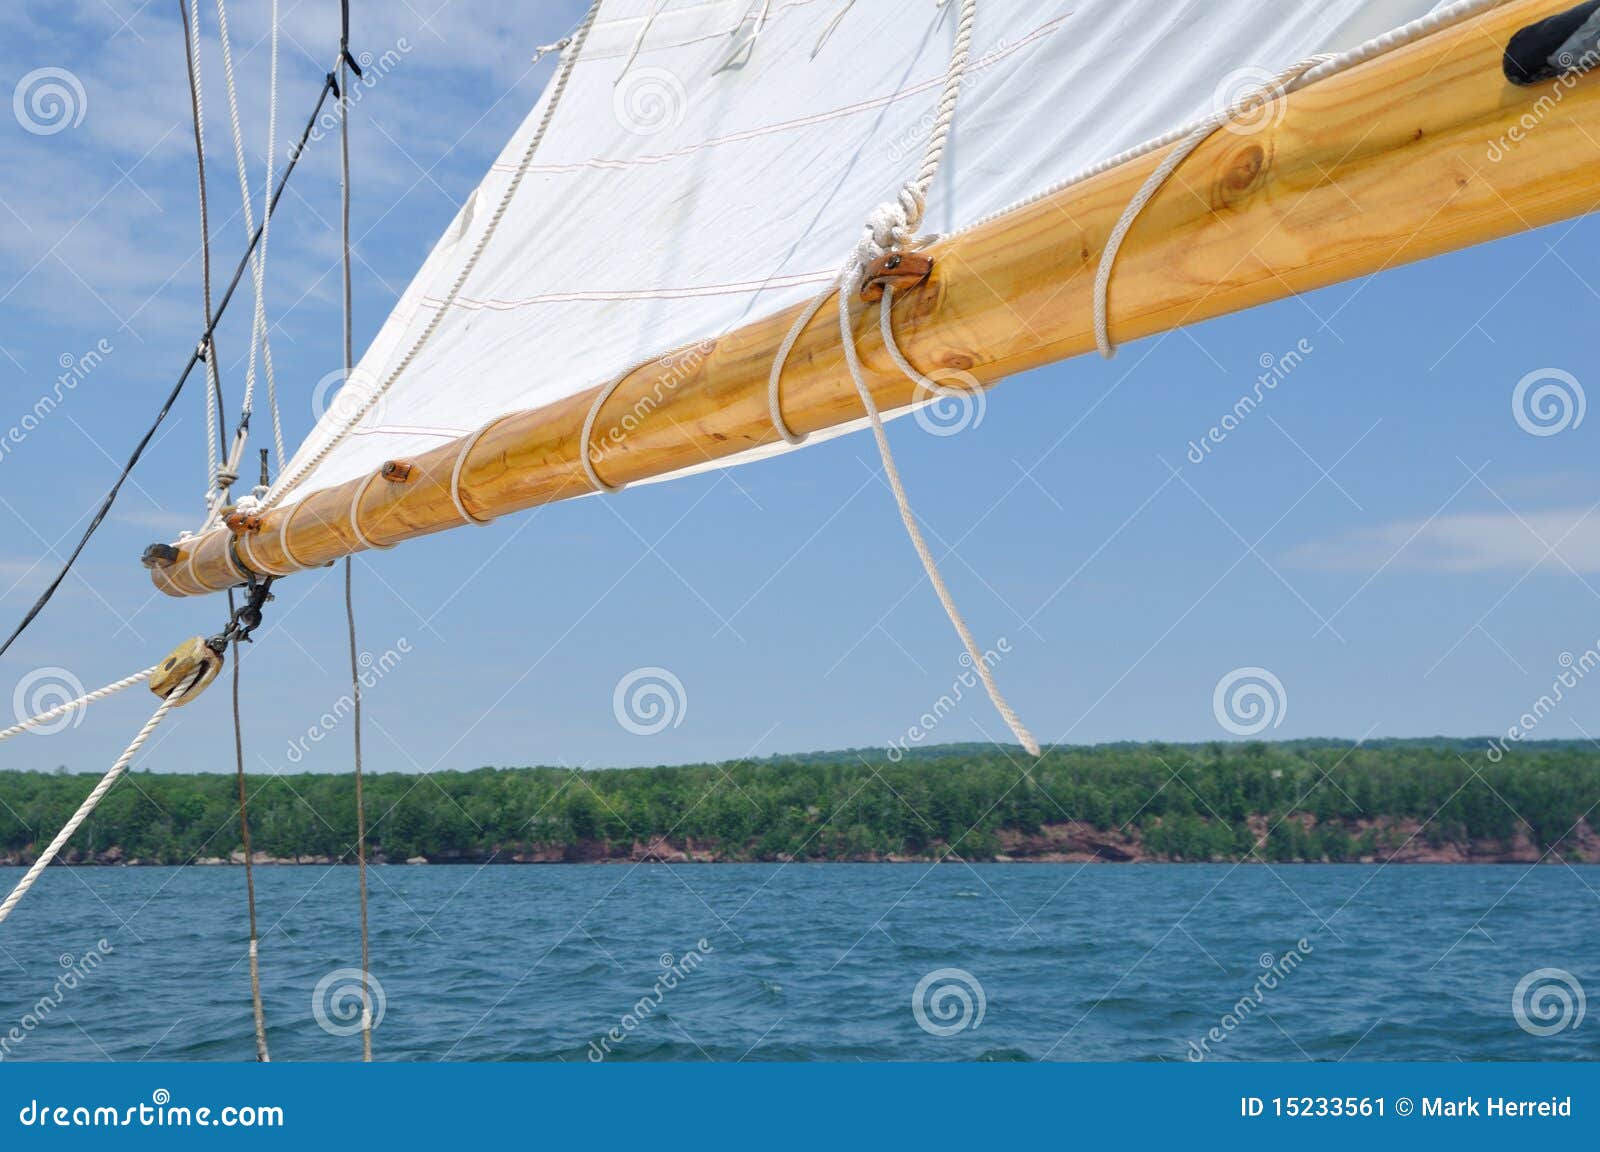 boom and foresail of schooner sailboat stock image - image